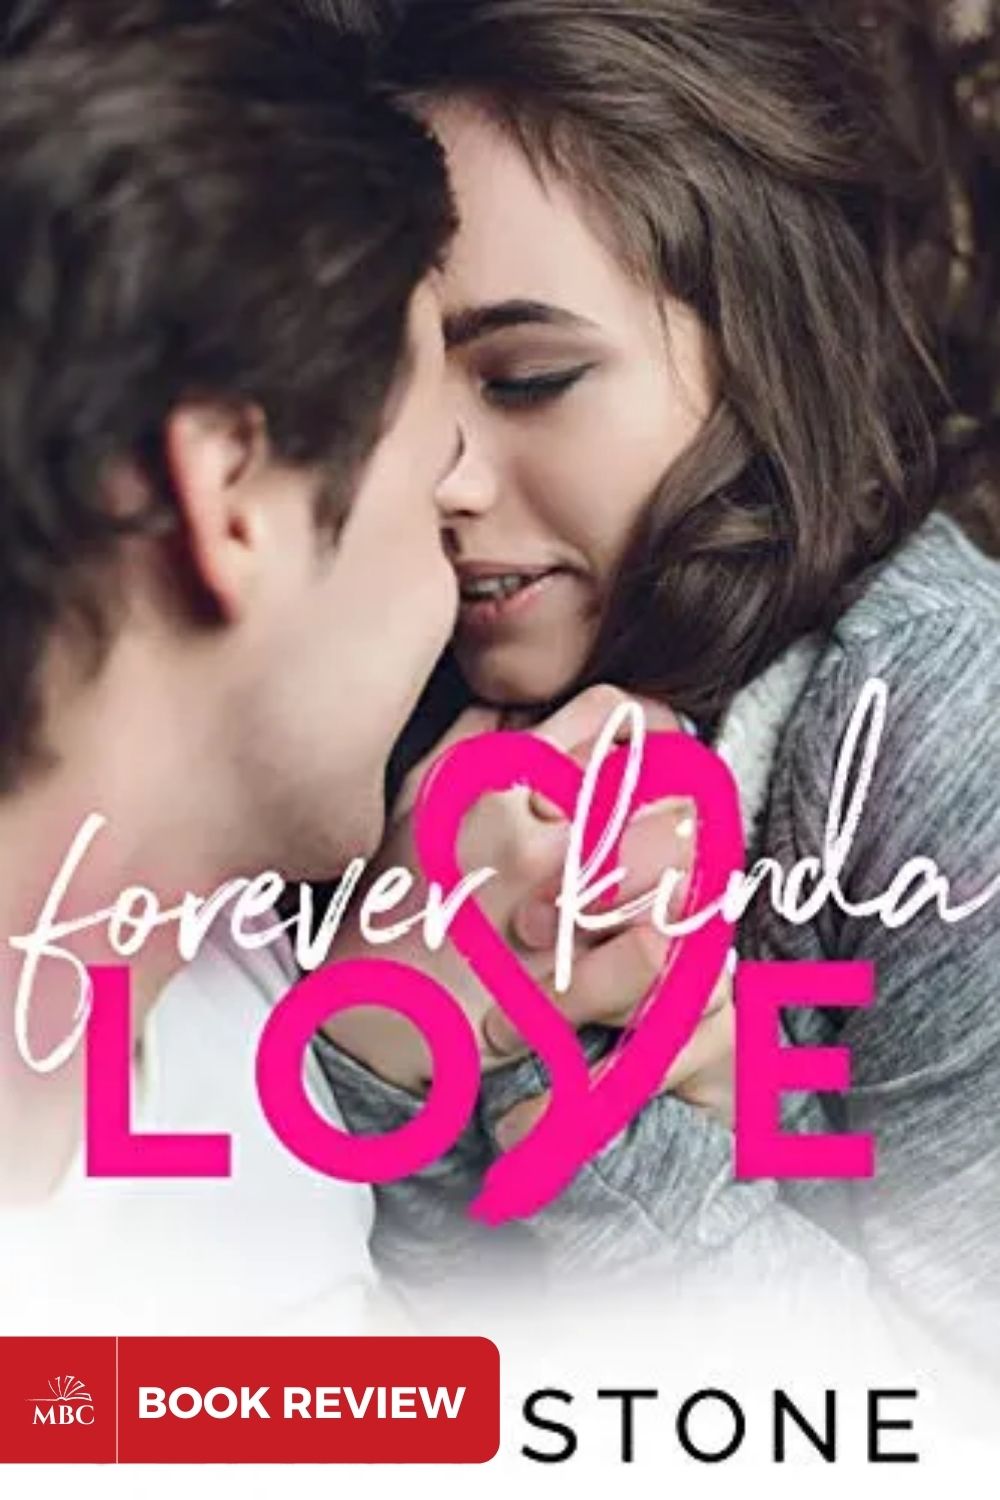 BOOK REVIEW: Forever Kinda Love by Clara Stone